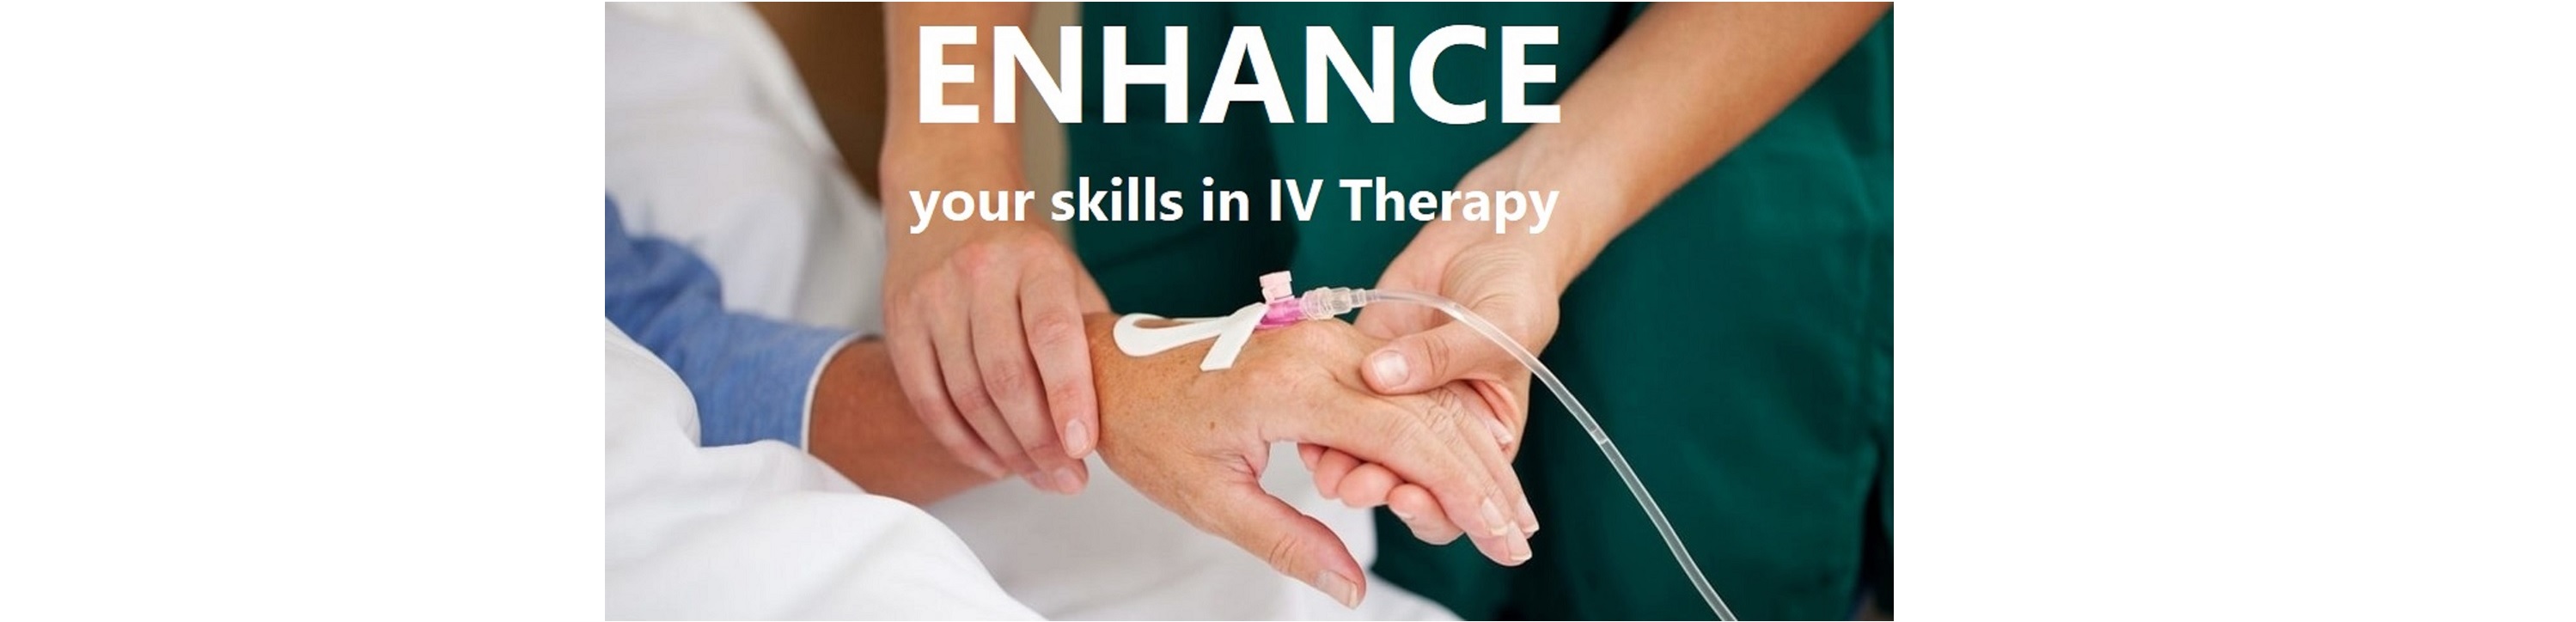 IV Therapy Training Course - December 2022 Banner